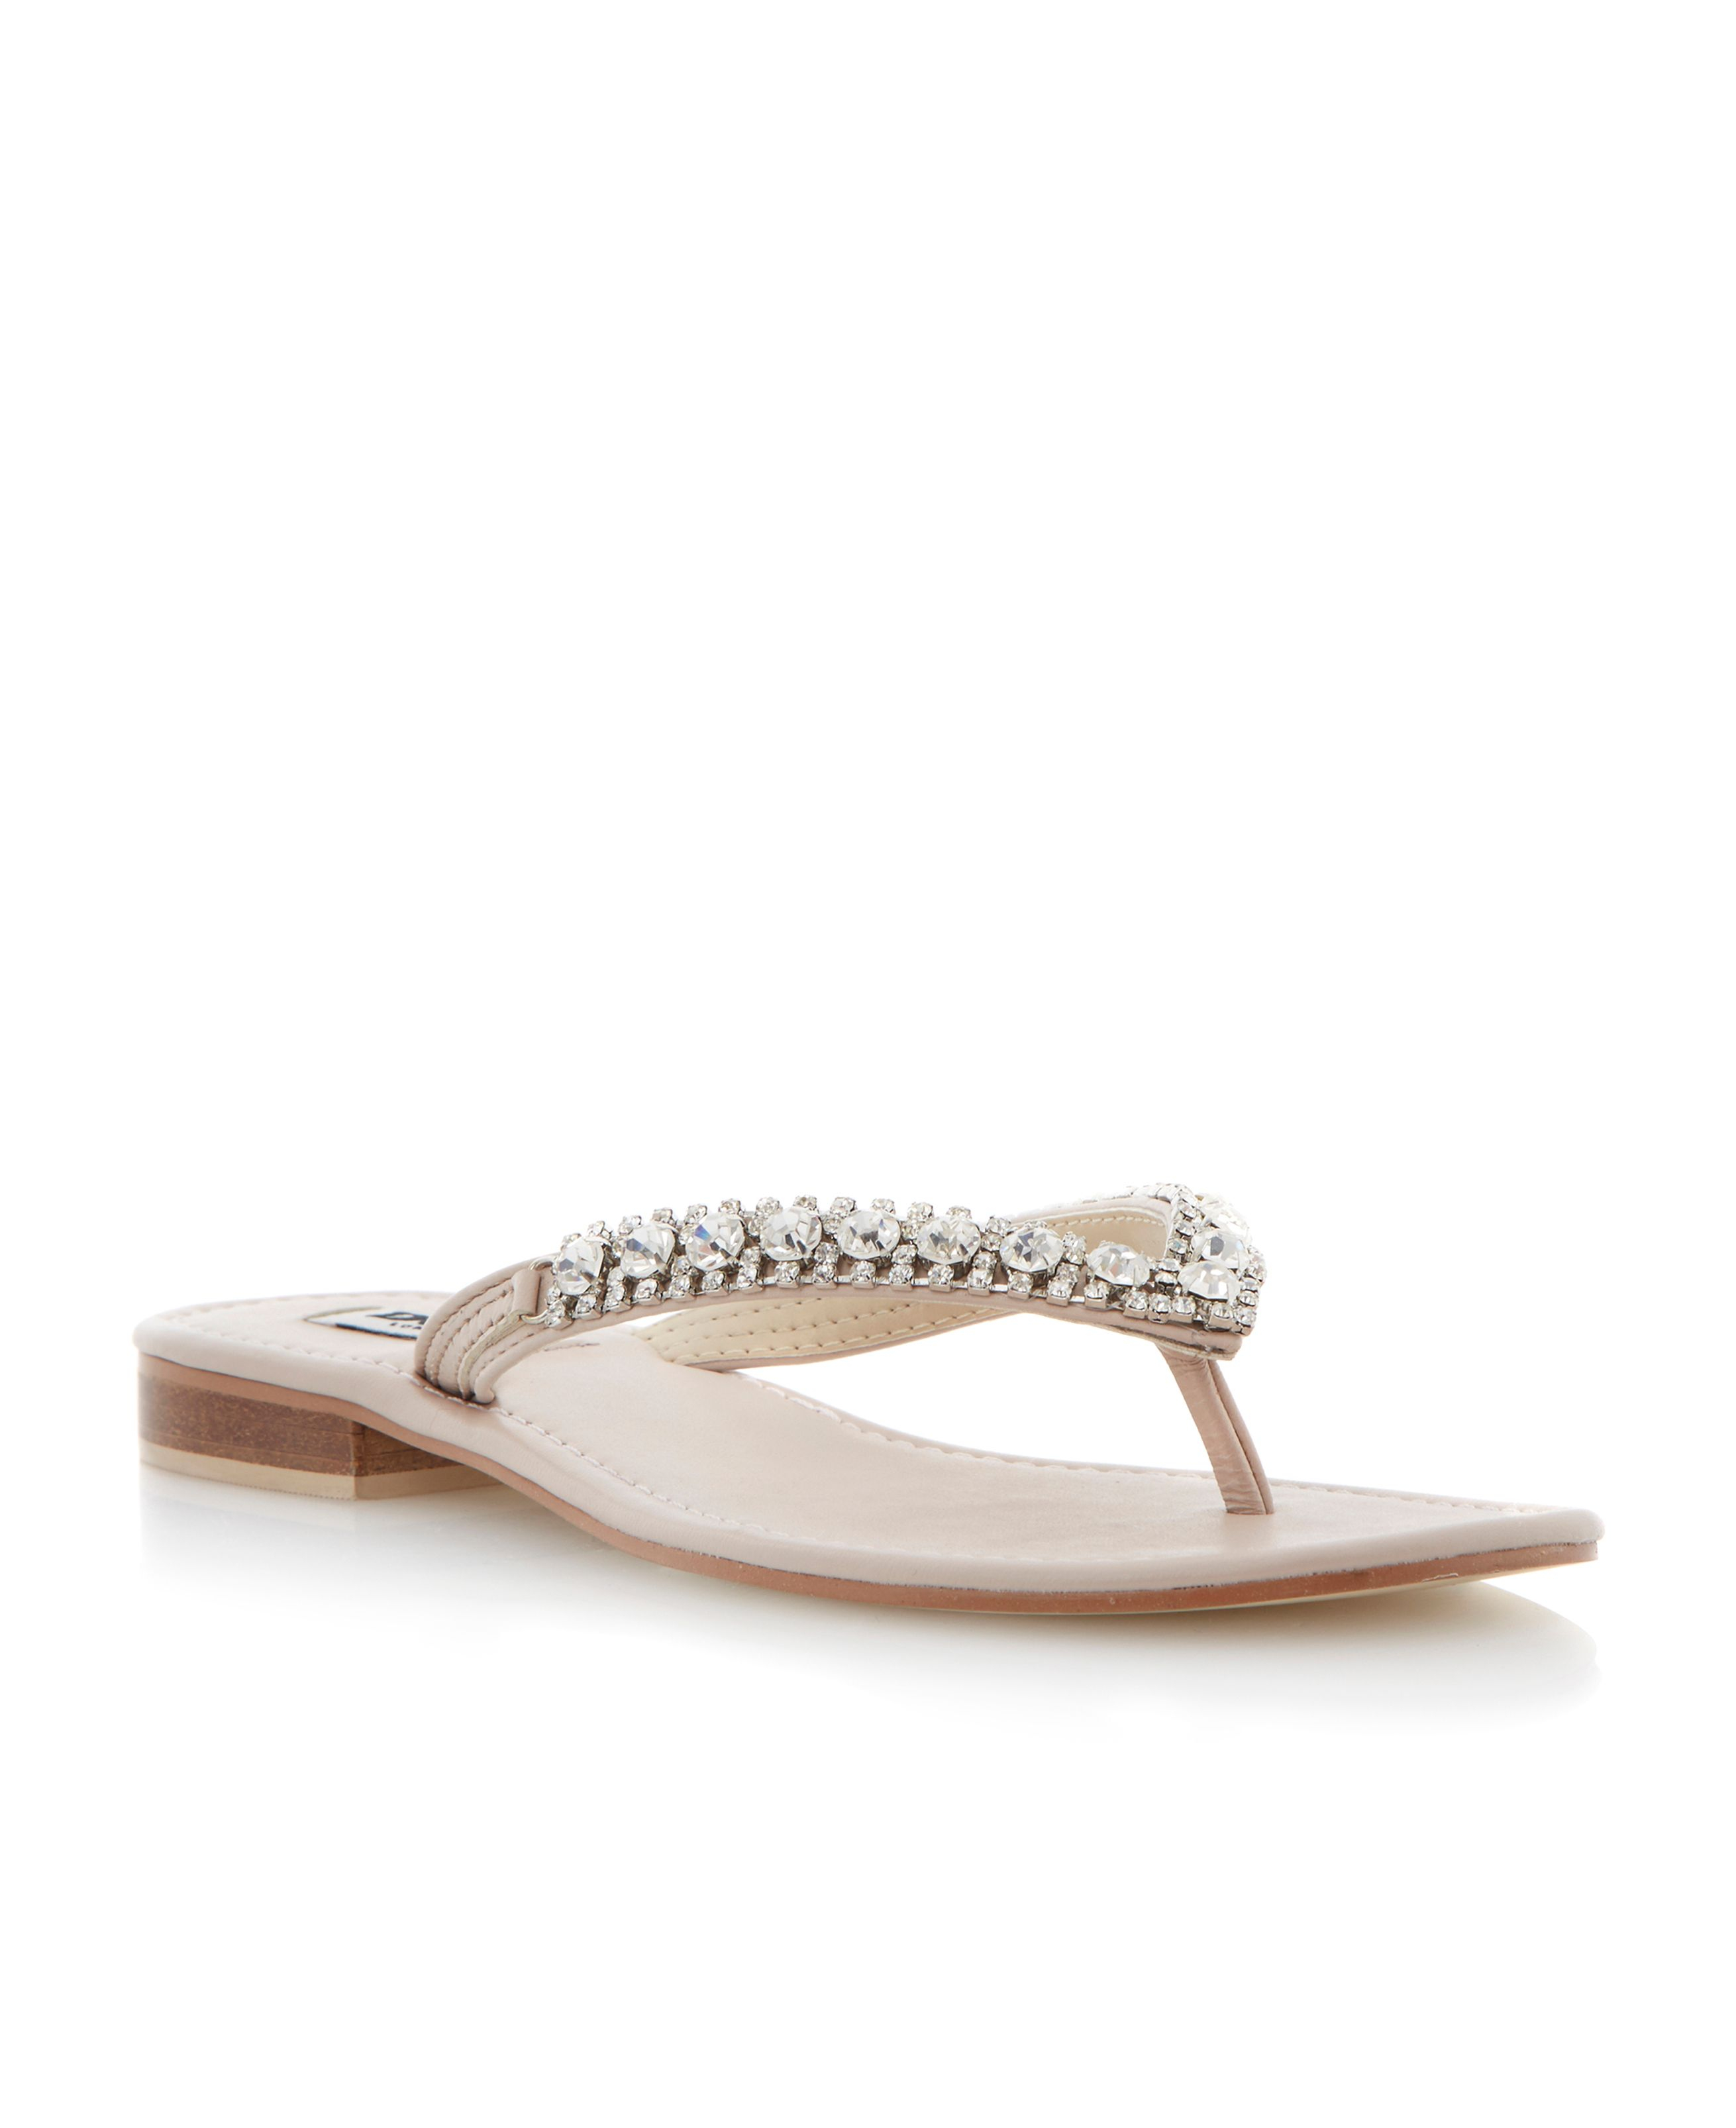 Dune Kiki Leather Flat Sandals in Pink | Lyst